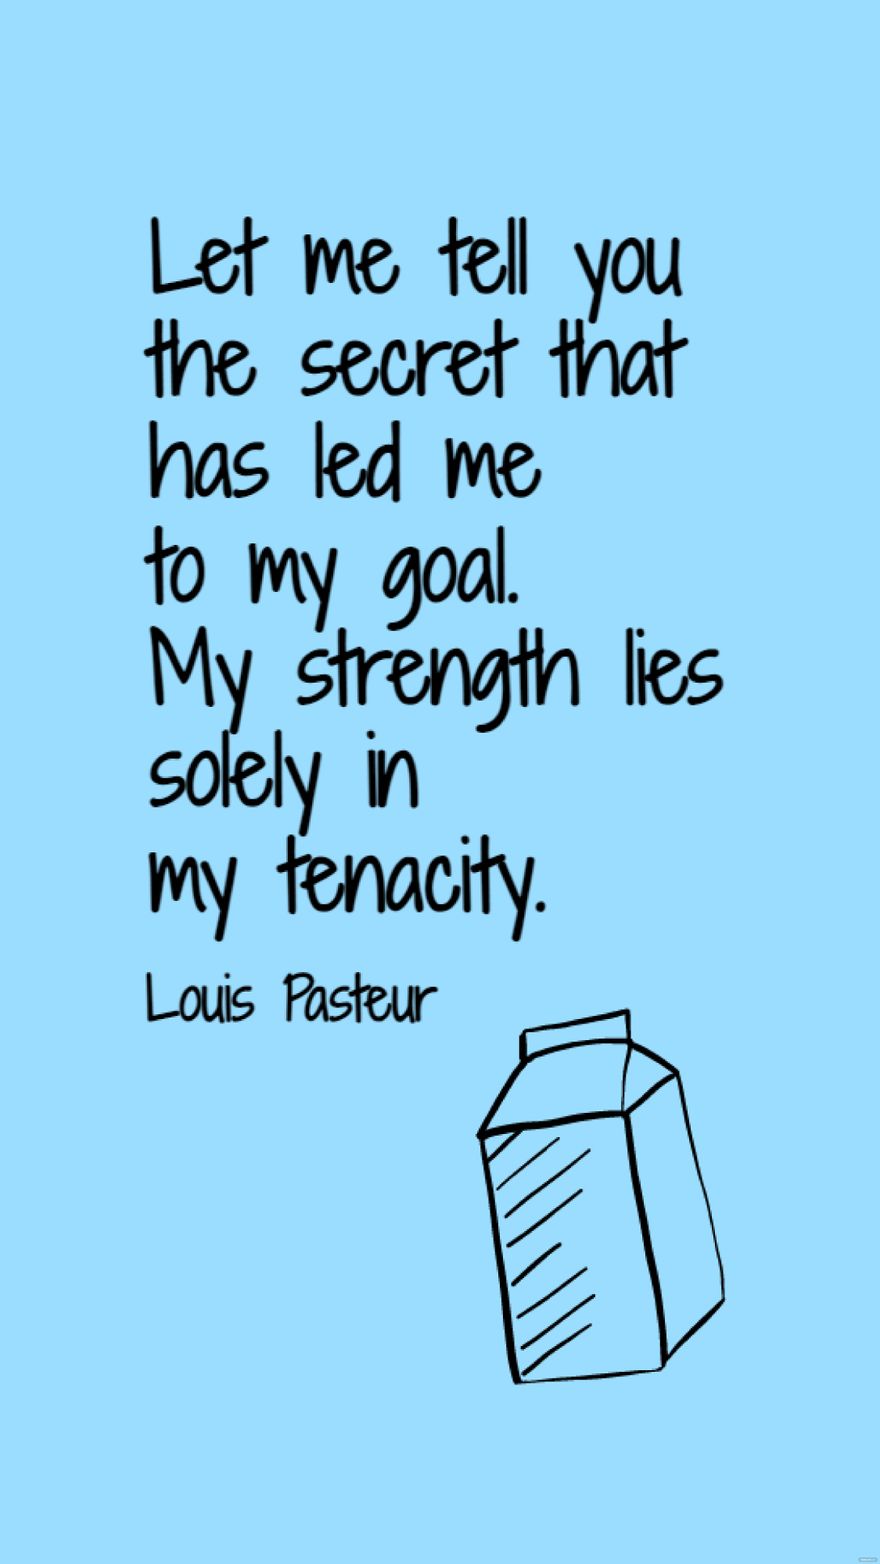 Louis Pasteur - Let me tell you the secret that has led me to my goal. My strength lies solely in my tenacity. in JPG